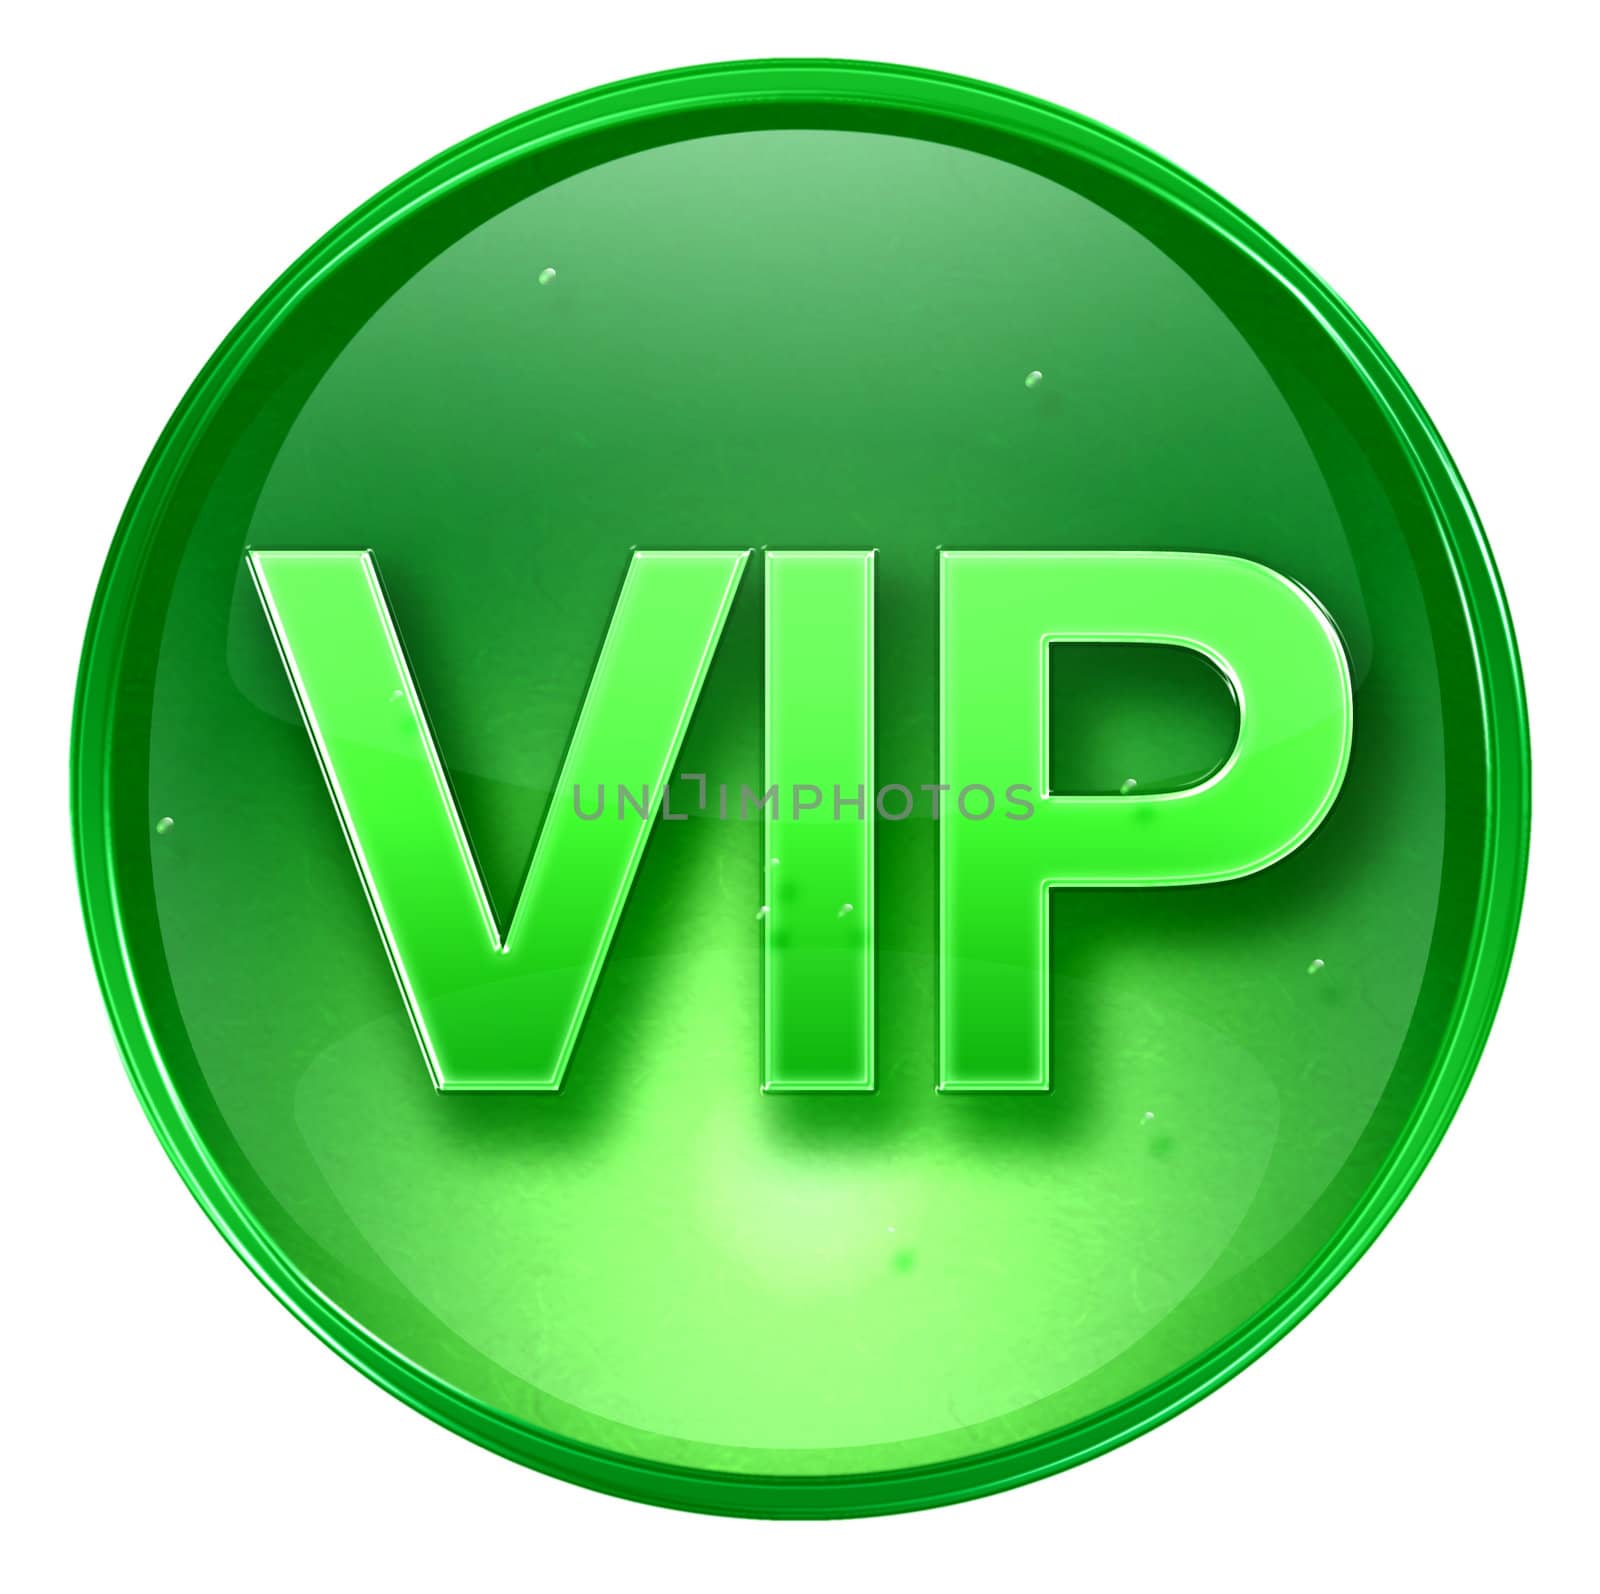 VIP icon green, isolated on white background. 